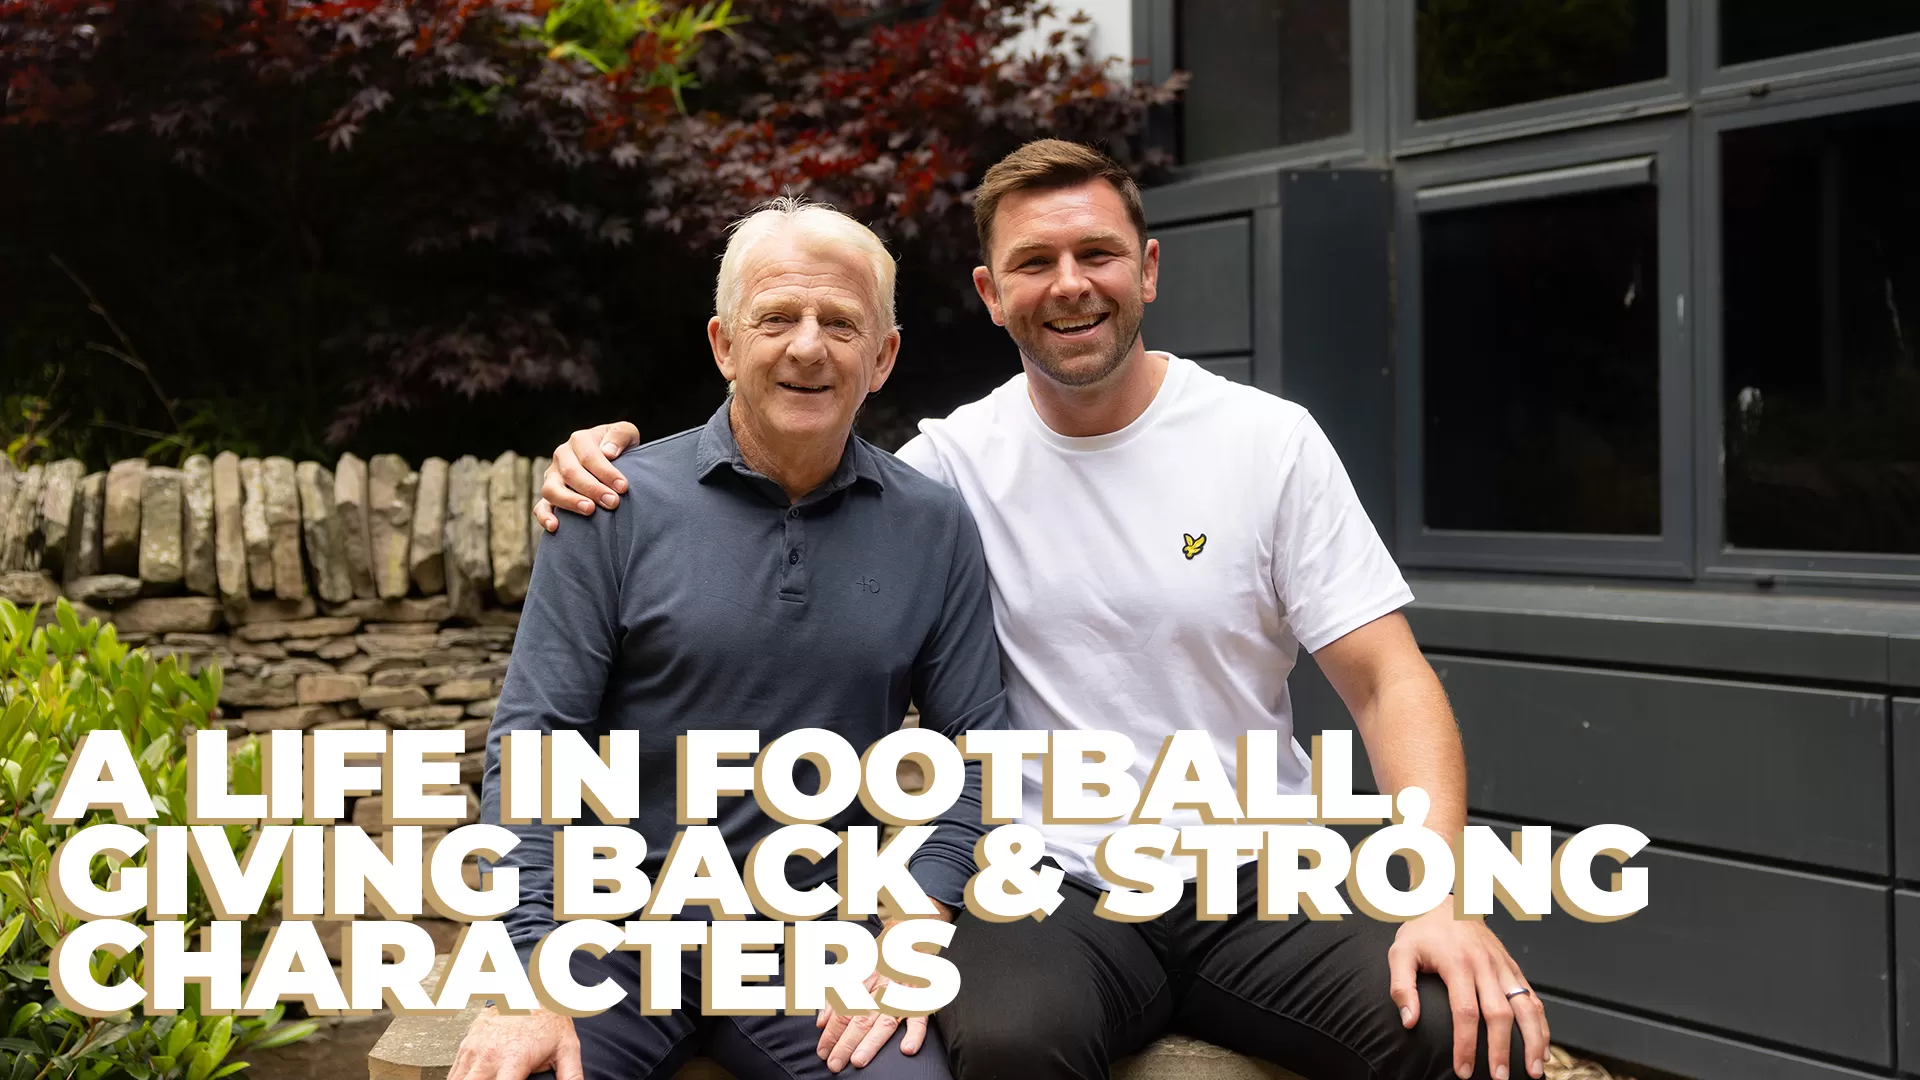 A LIFE IN FOOTBALL, GIVING BACK & STRONG CHARACTERS - GORDON STRACHAN